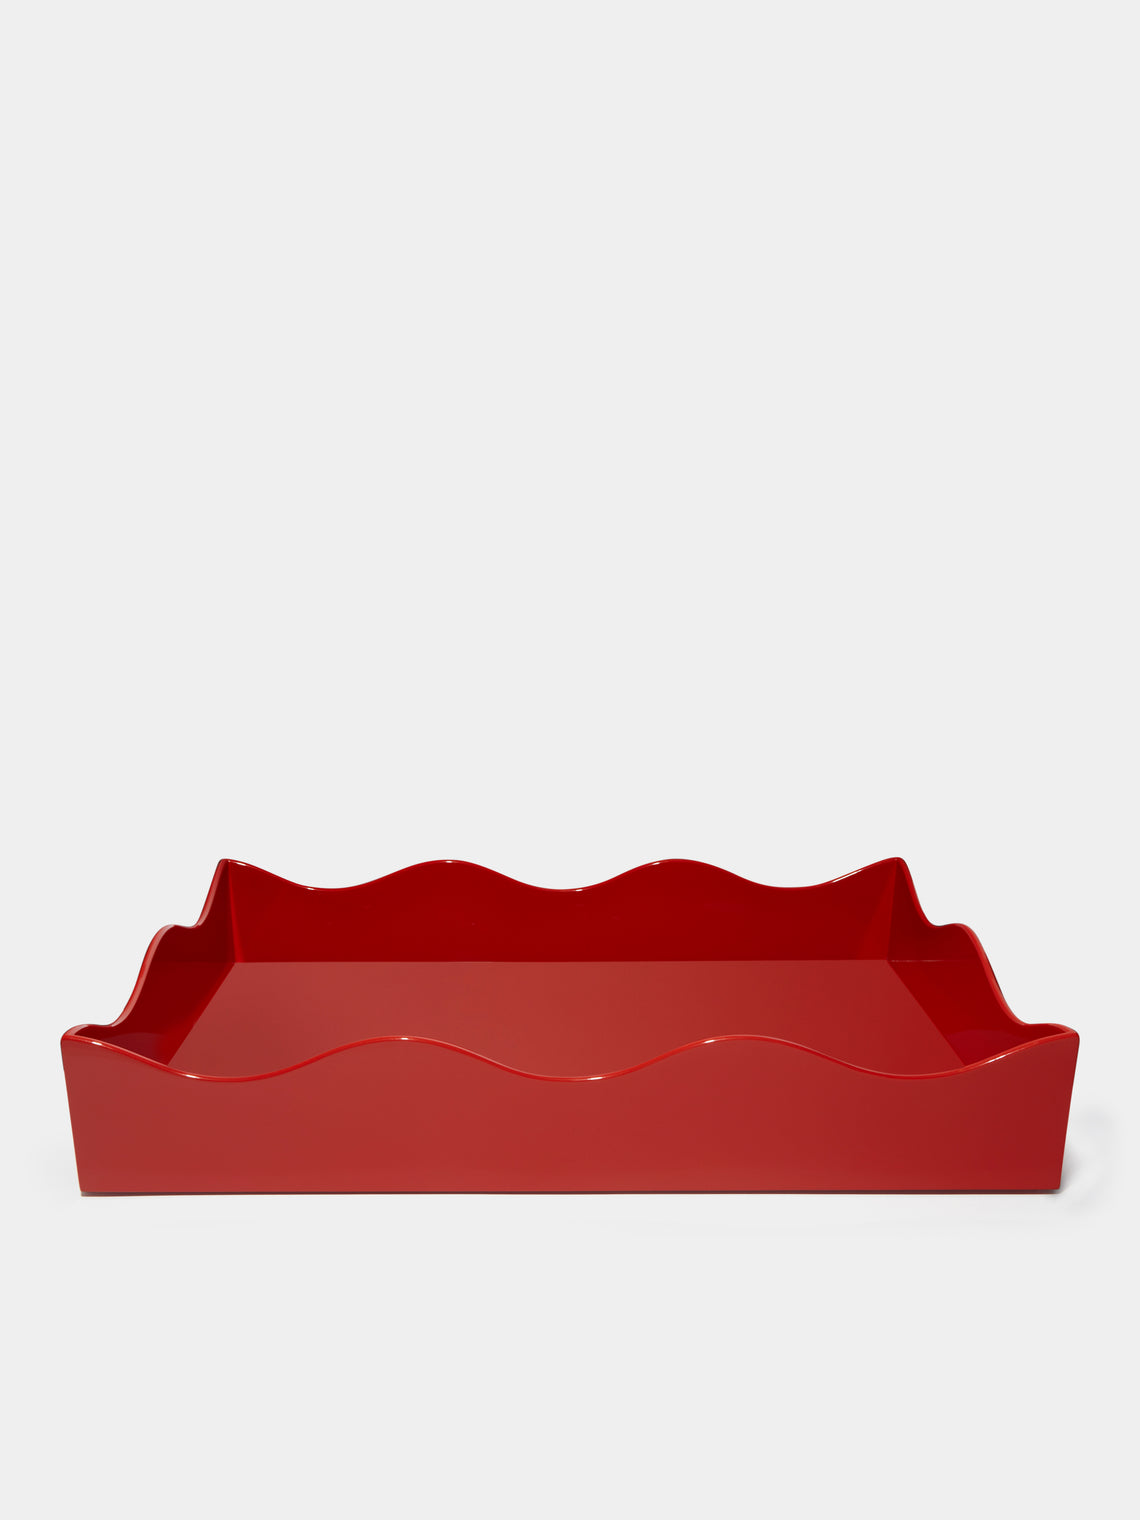 The Lacquer Company - Belles Rives Lacquered Large Tray - Red - ABASK